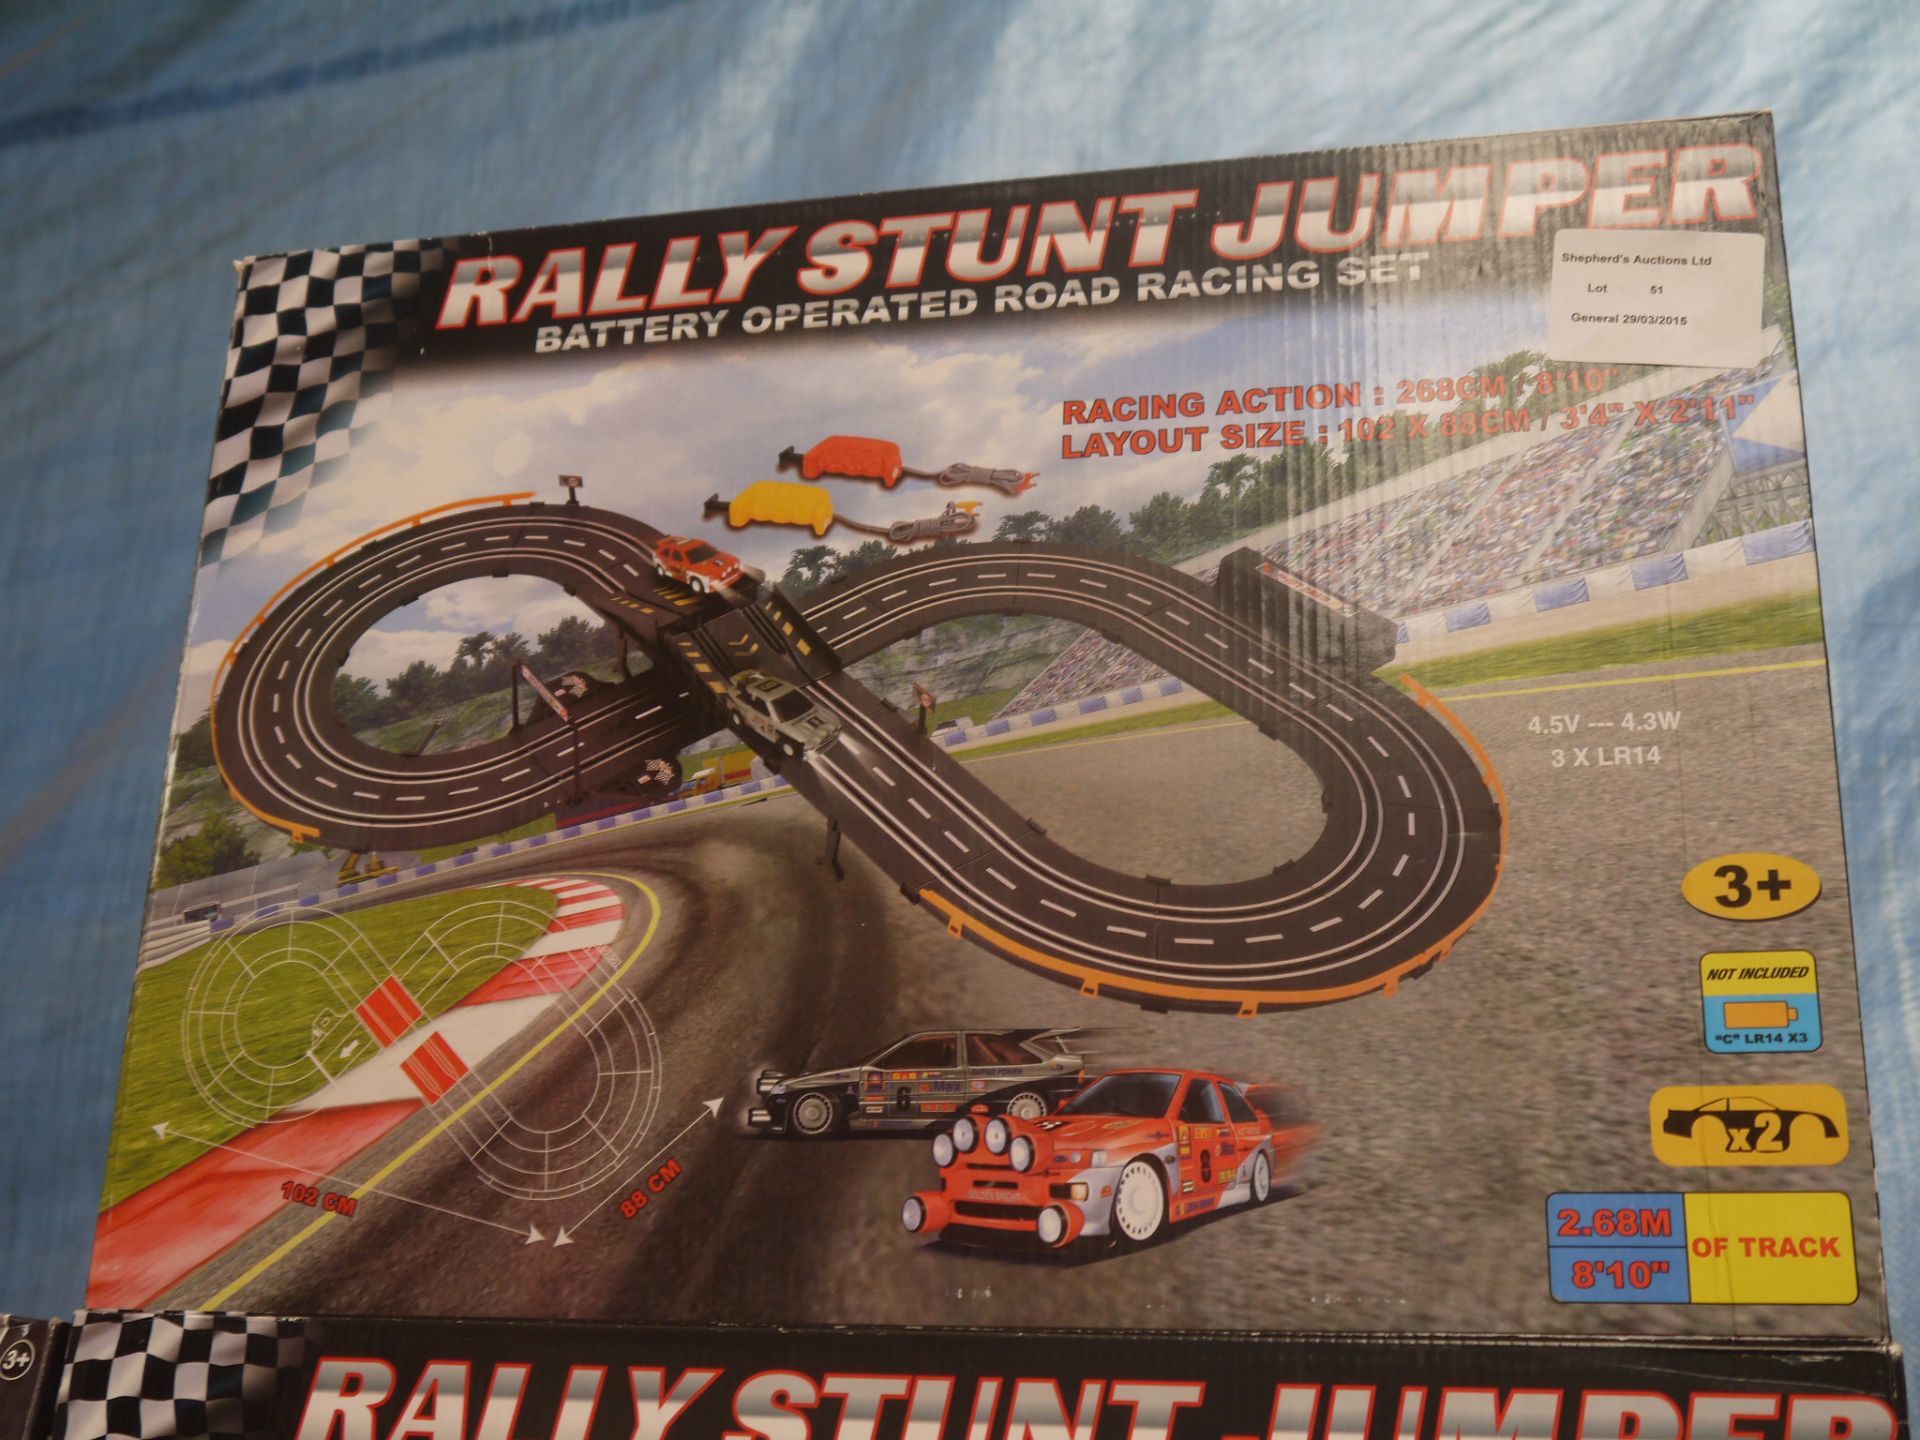 rally stunt jump battery operated racing set